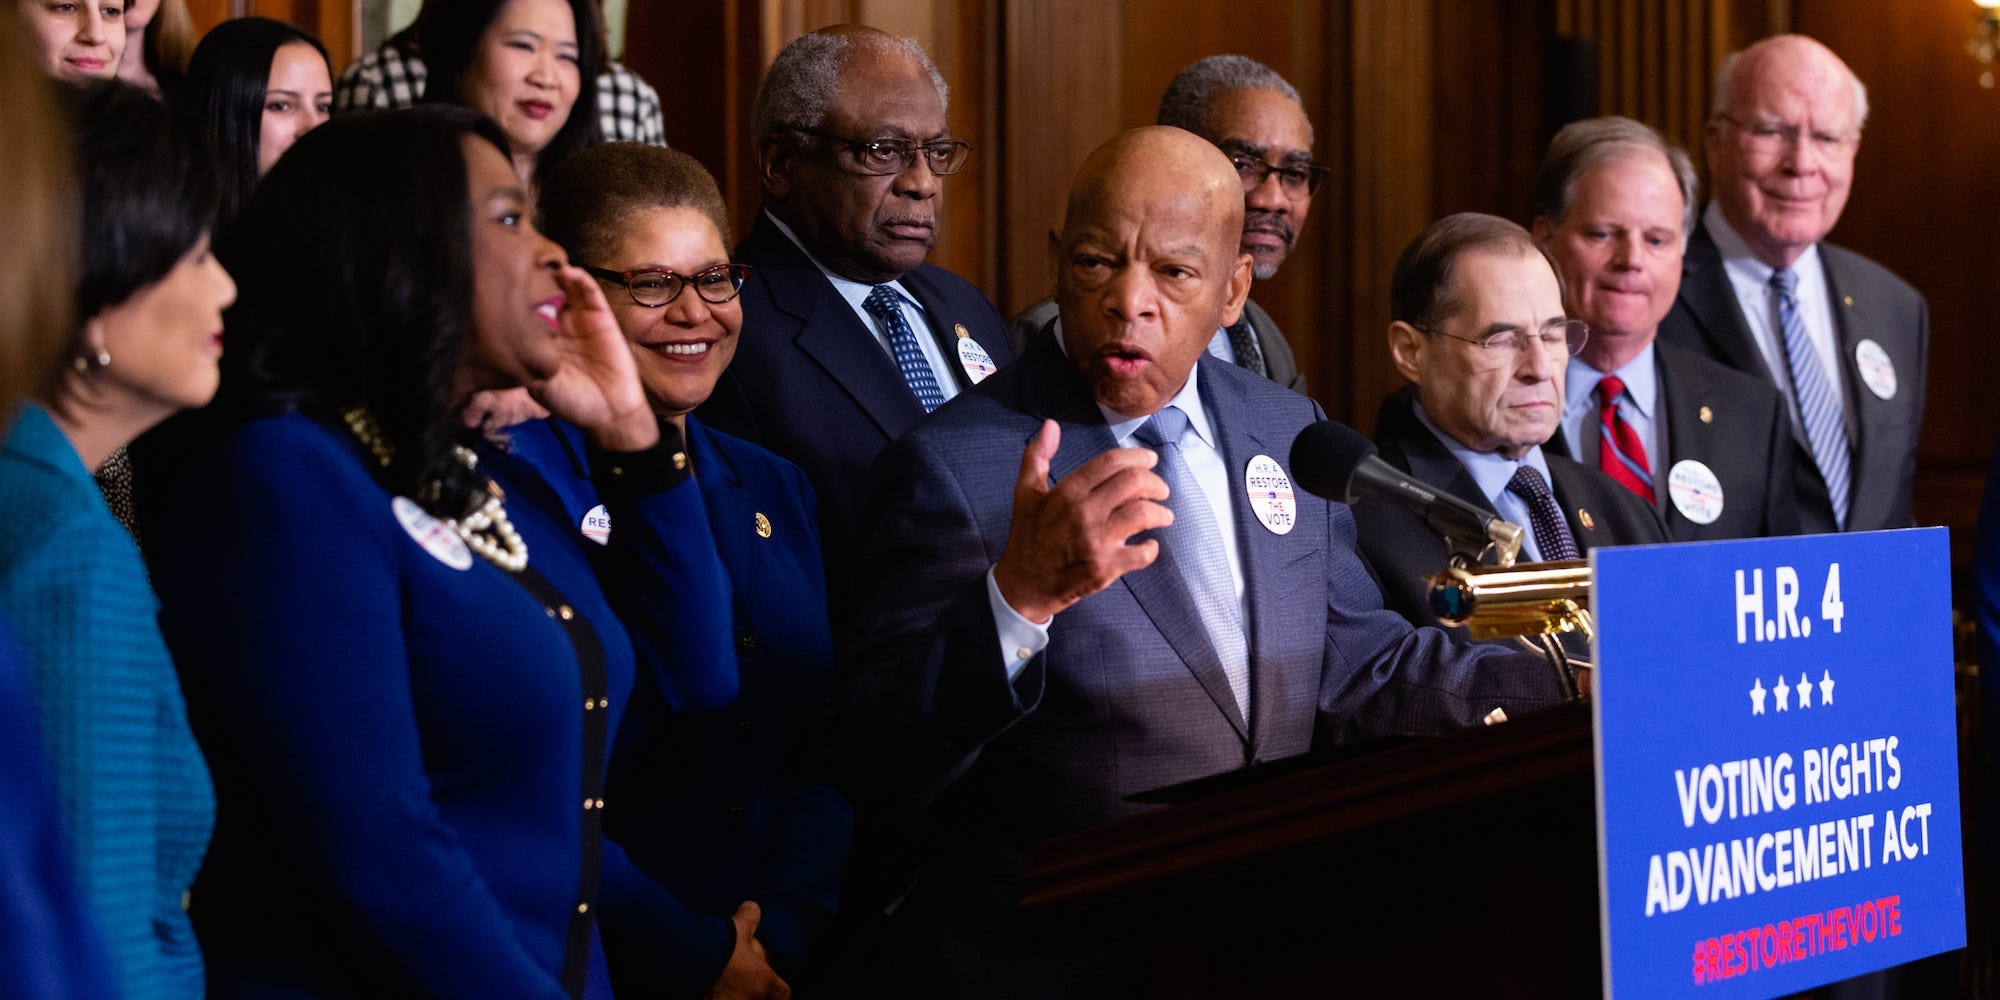 The late Rep. John Lewis, (GA-5), speaks at a news conference